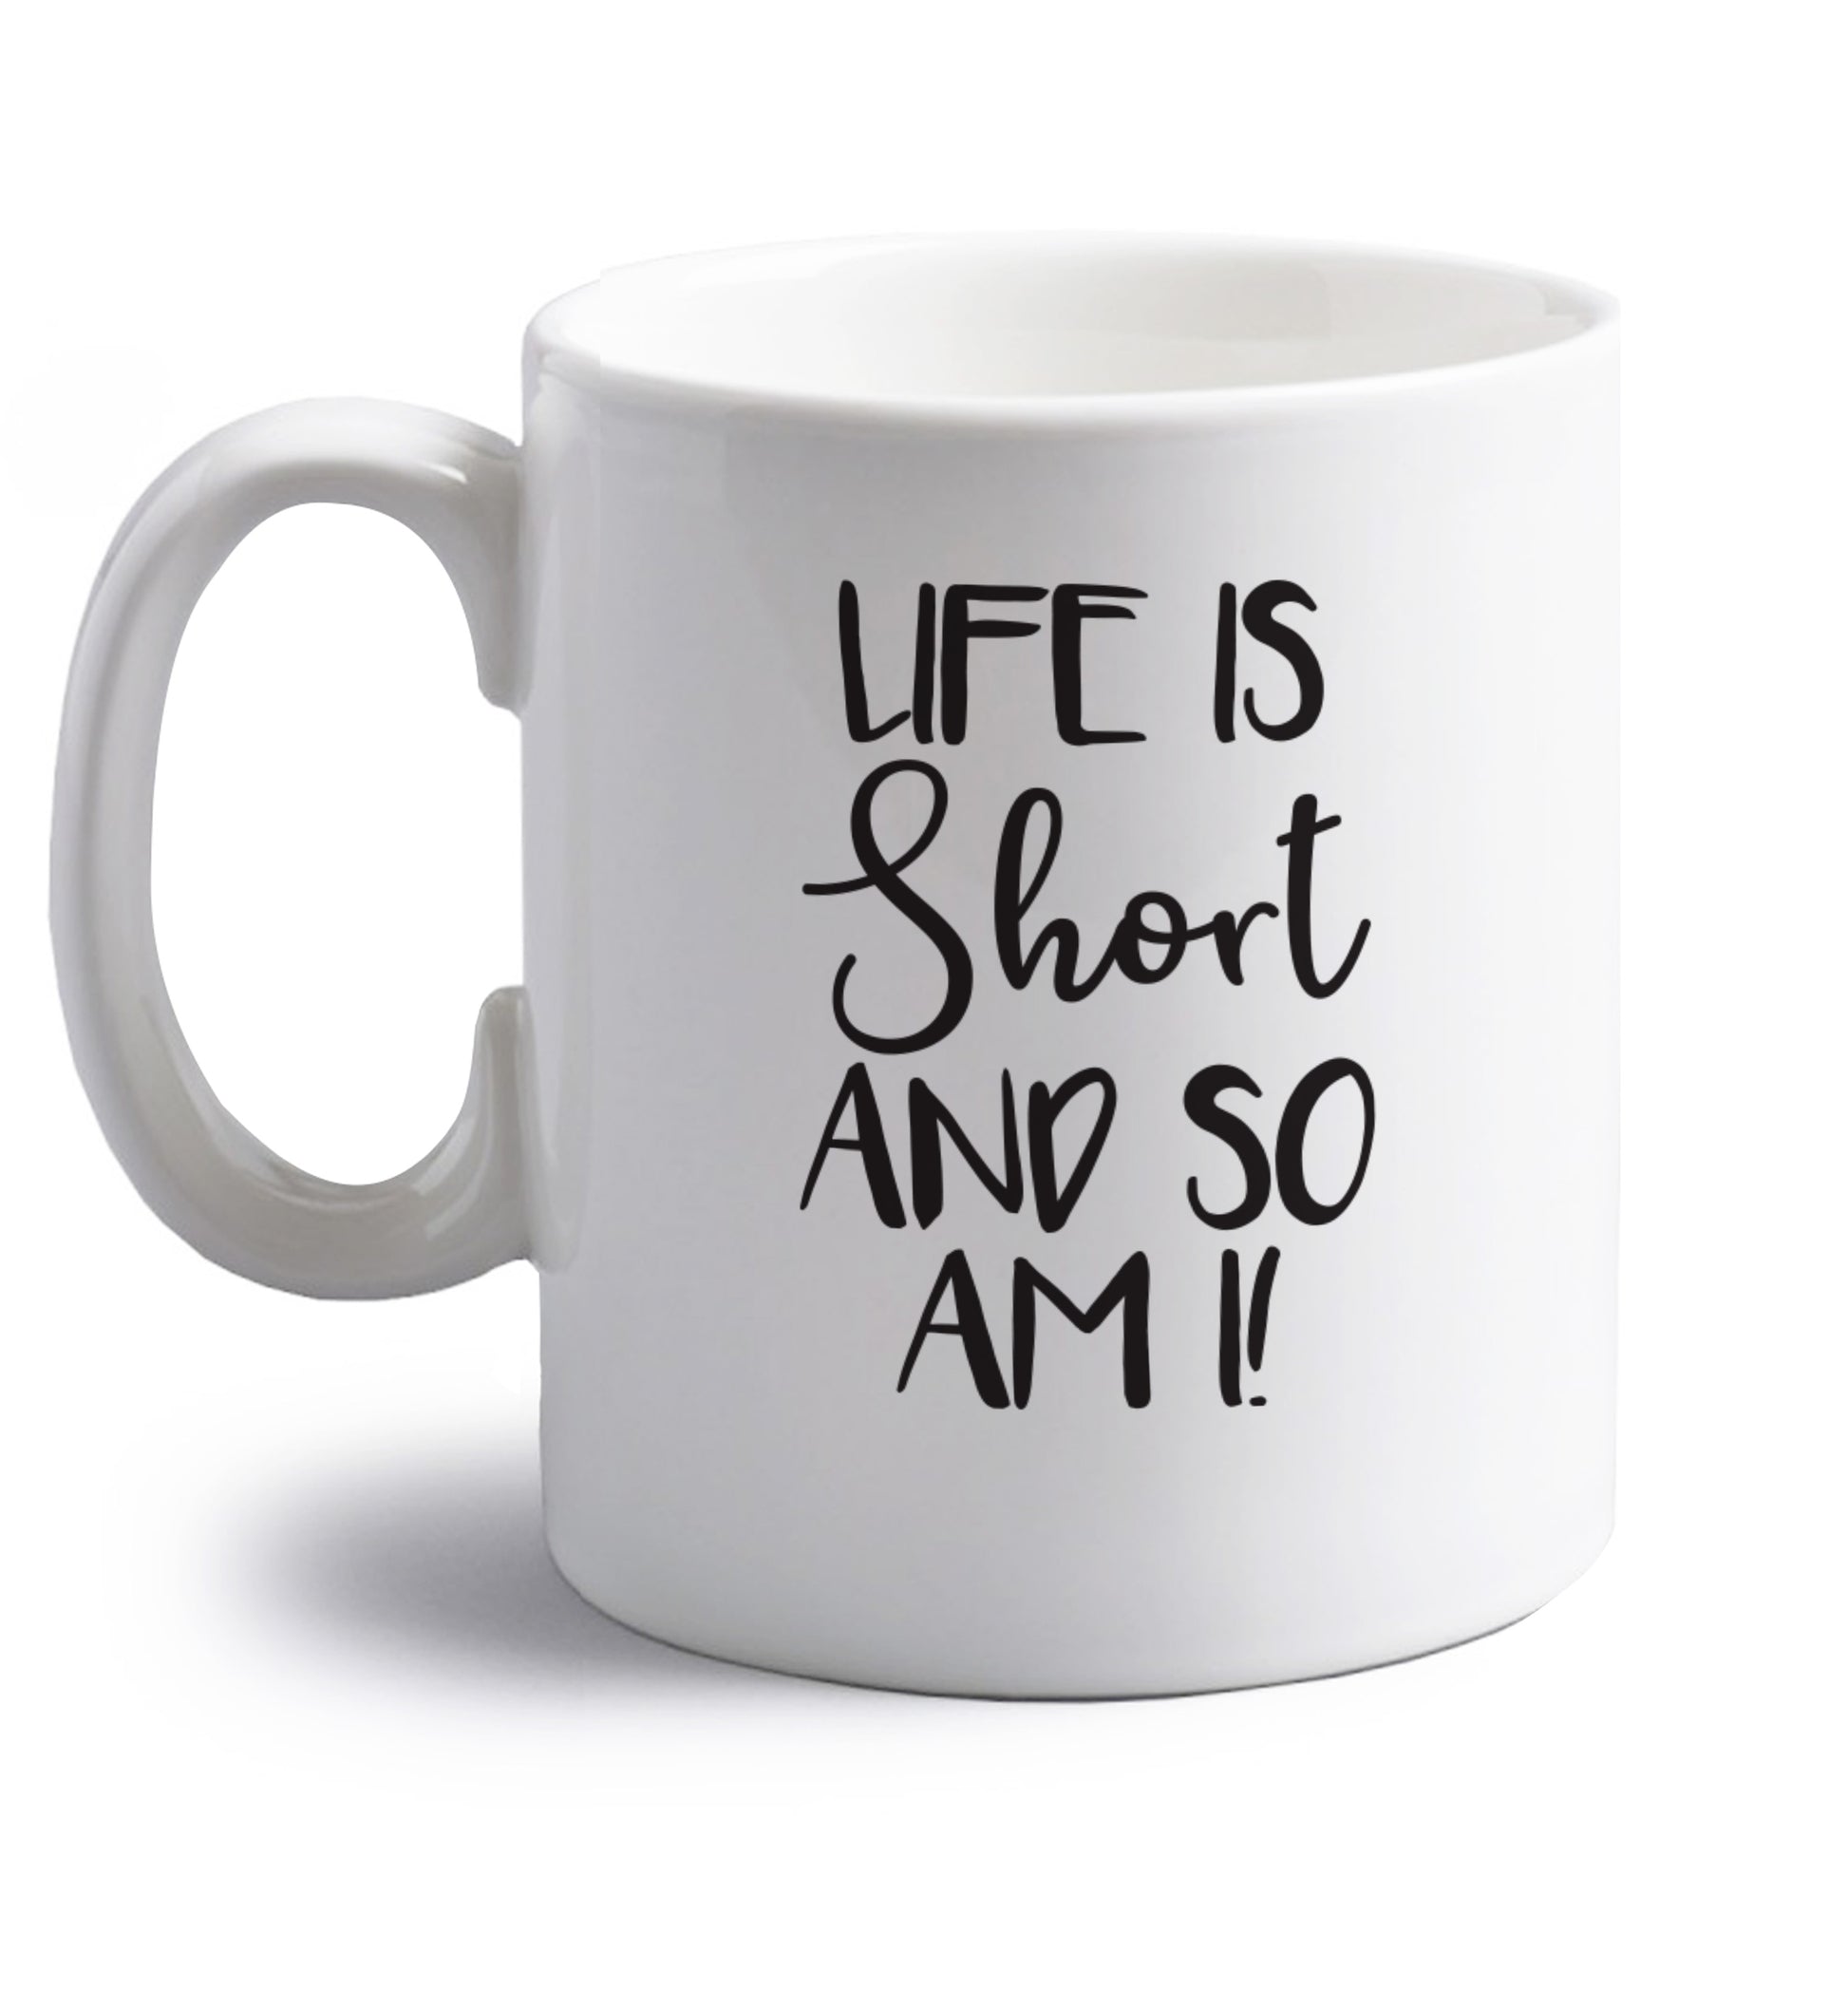 Life is short and so am I! right handed white ceramic mug 